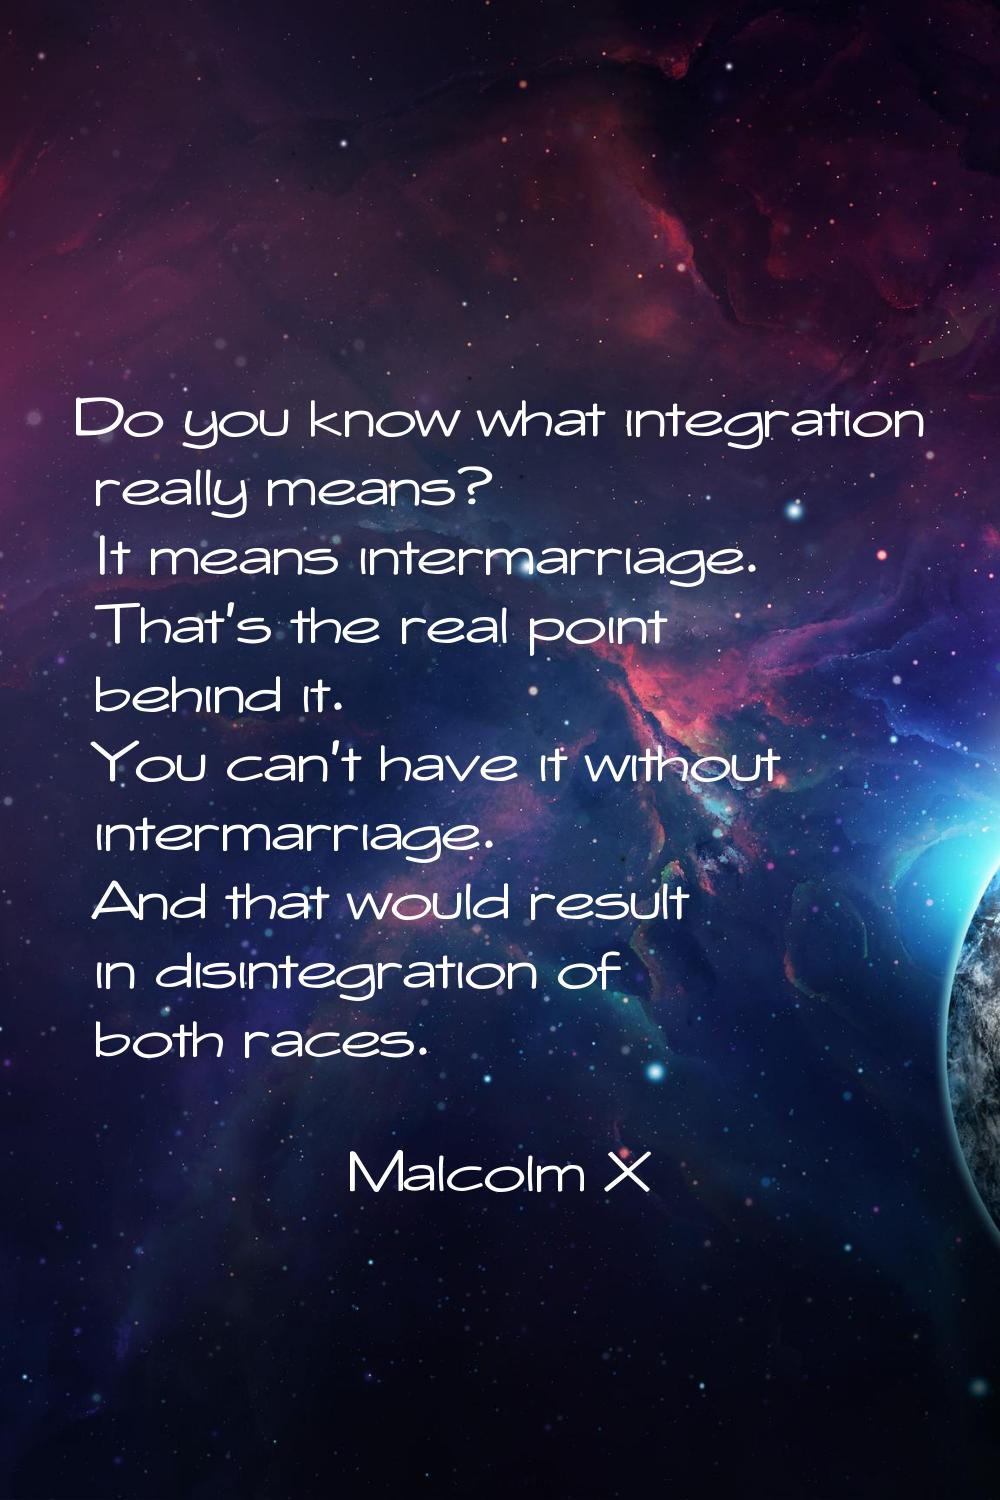 Do you know what integration really means? It means intermarriage. That's the real point behind it.